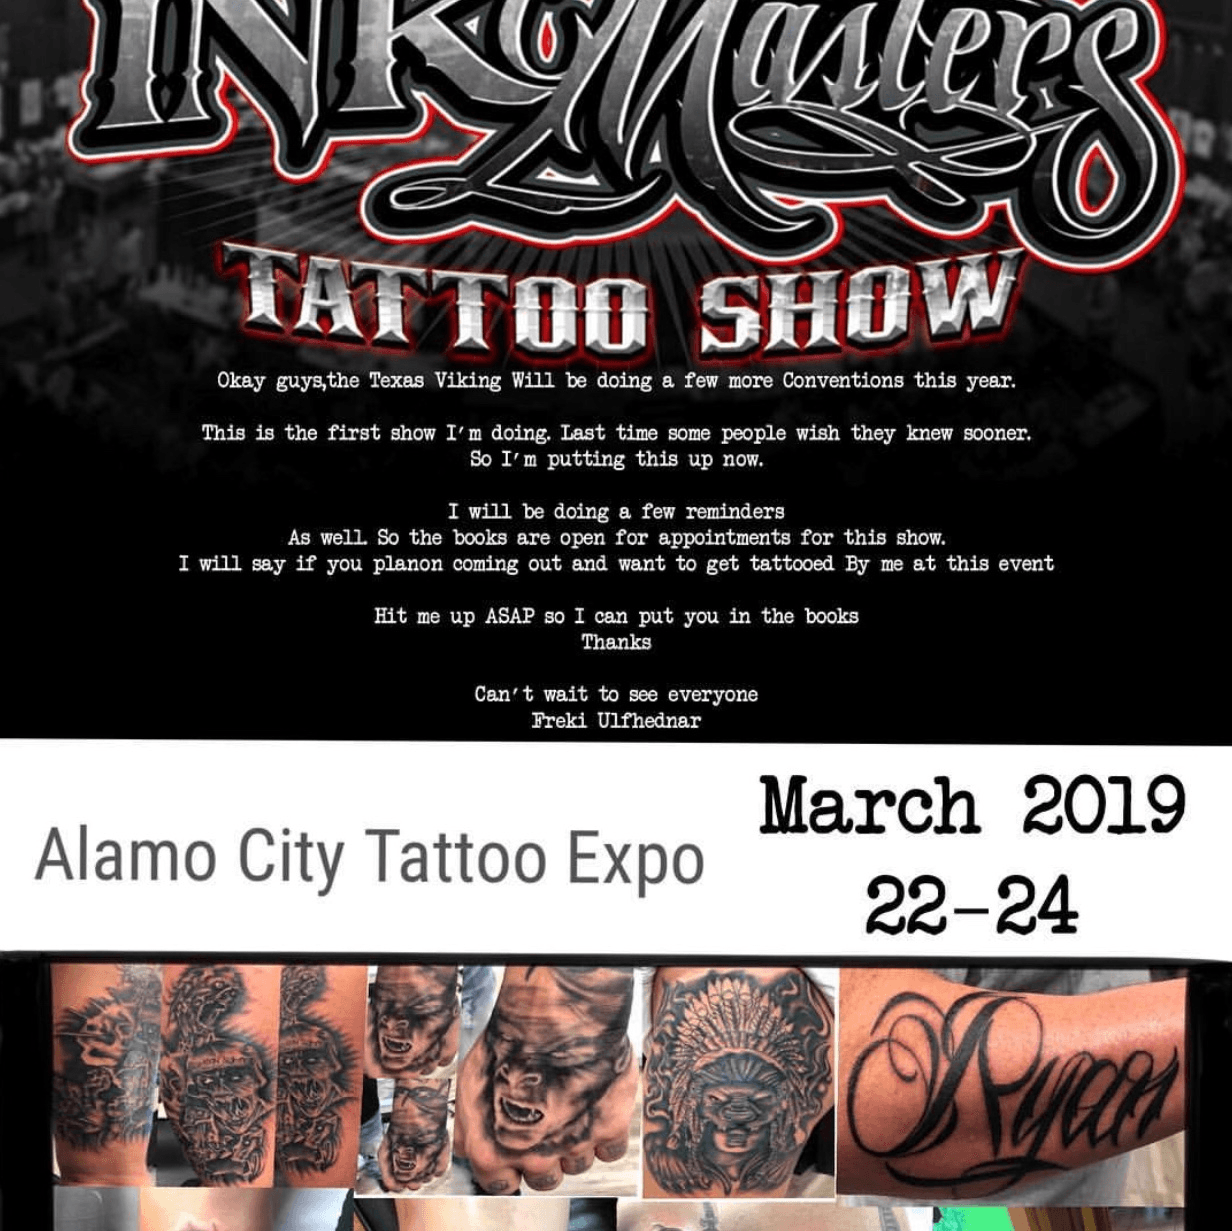 San Antonio shows off its ink at annual tattoo expo